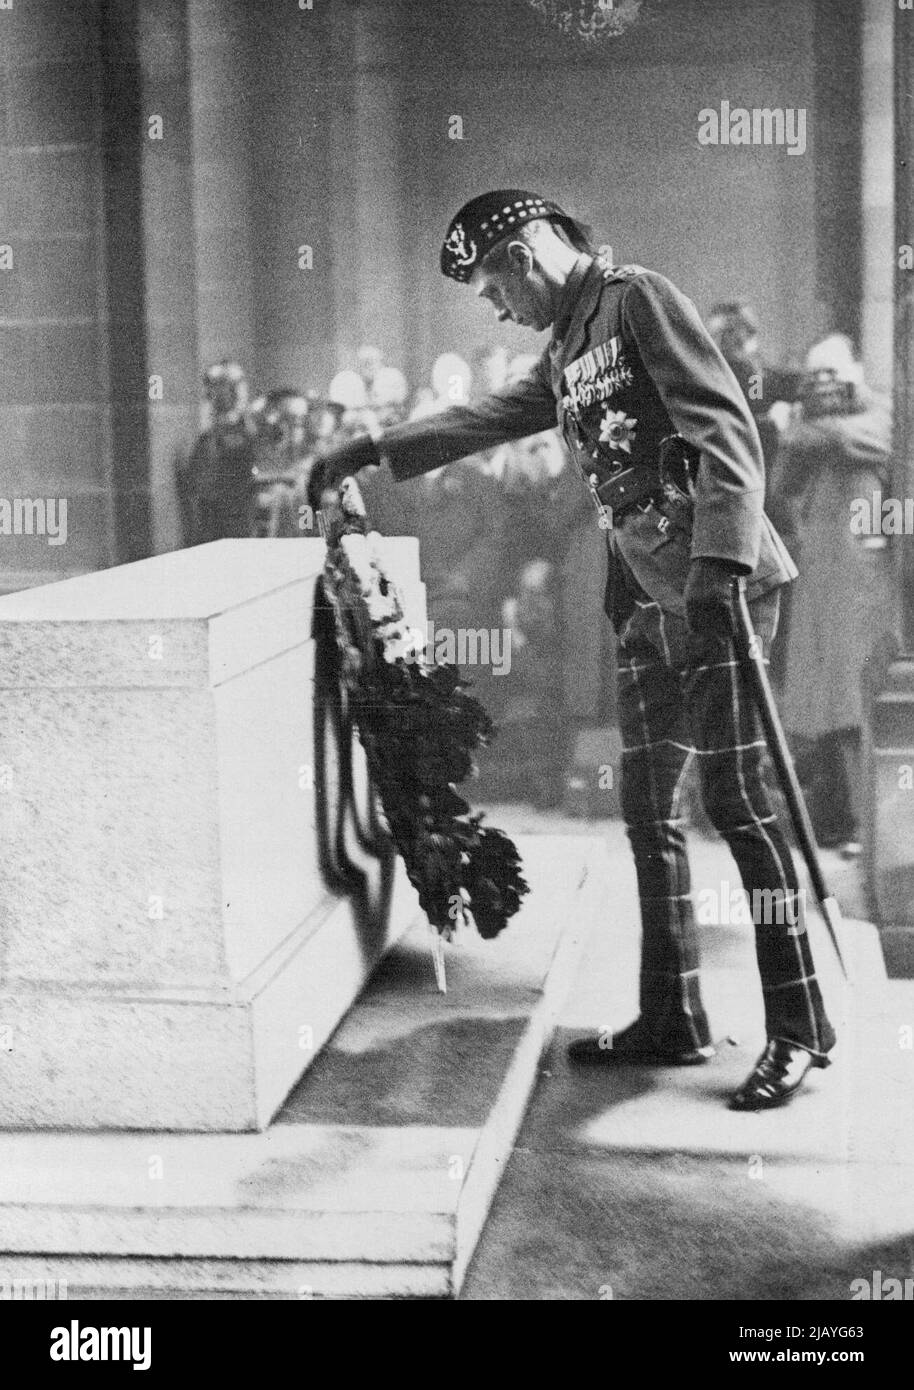 Armistice Day in Edinburgh: H.R.H. the Prince of Wales laying a wreath at the stone of Remembrance during the Armistice Day ceremony in Edinburgh yesterday. November 12, 1935. (Photo by The Topical Press Agency Ltd.). Stock Photo